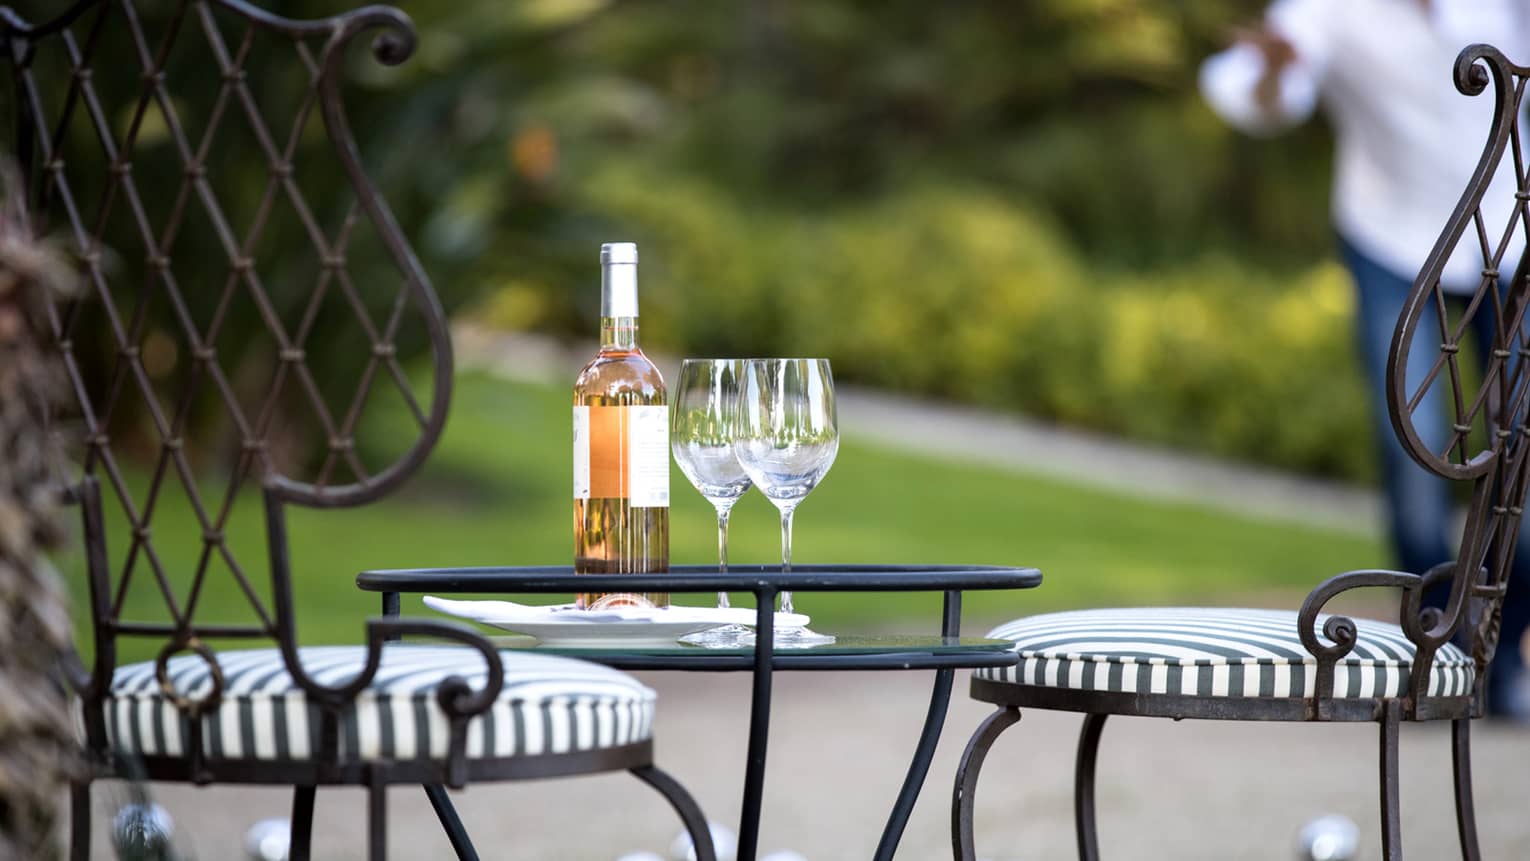 Close-up of bottle of wine, two wine glasses on iron patio table